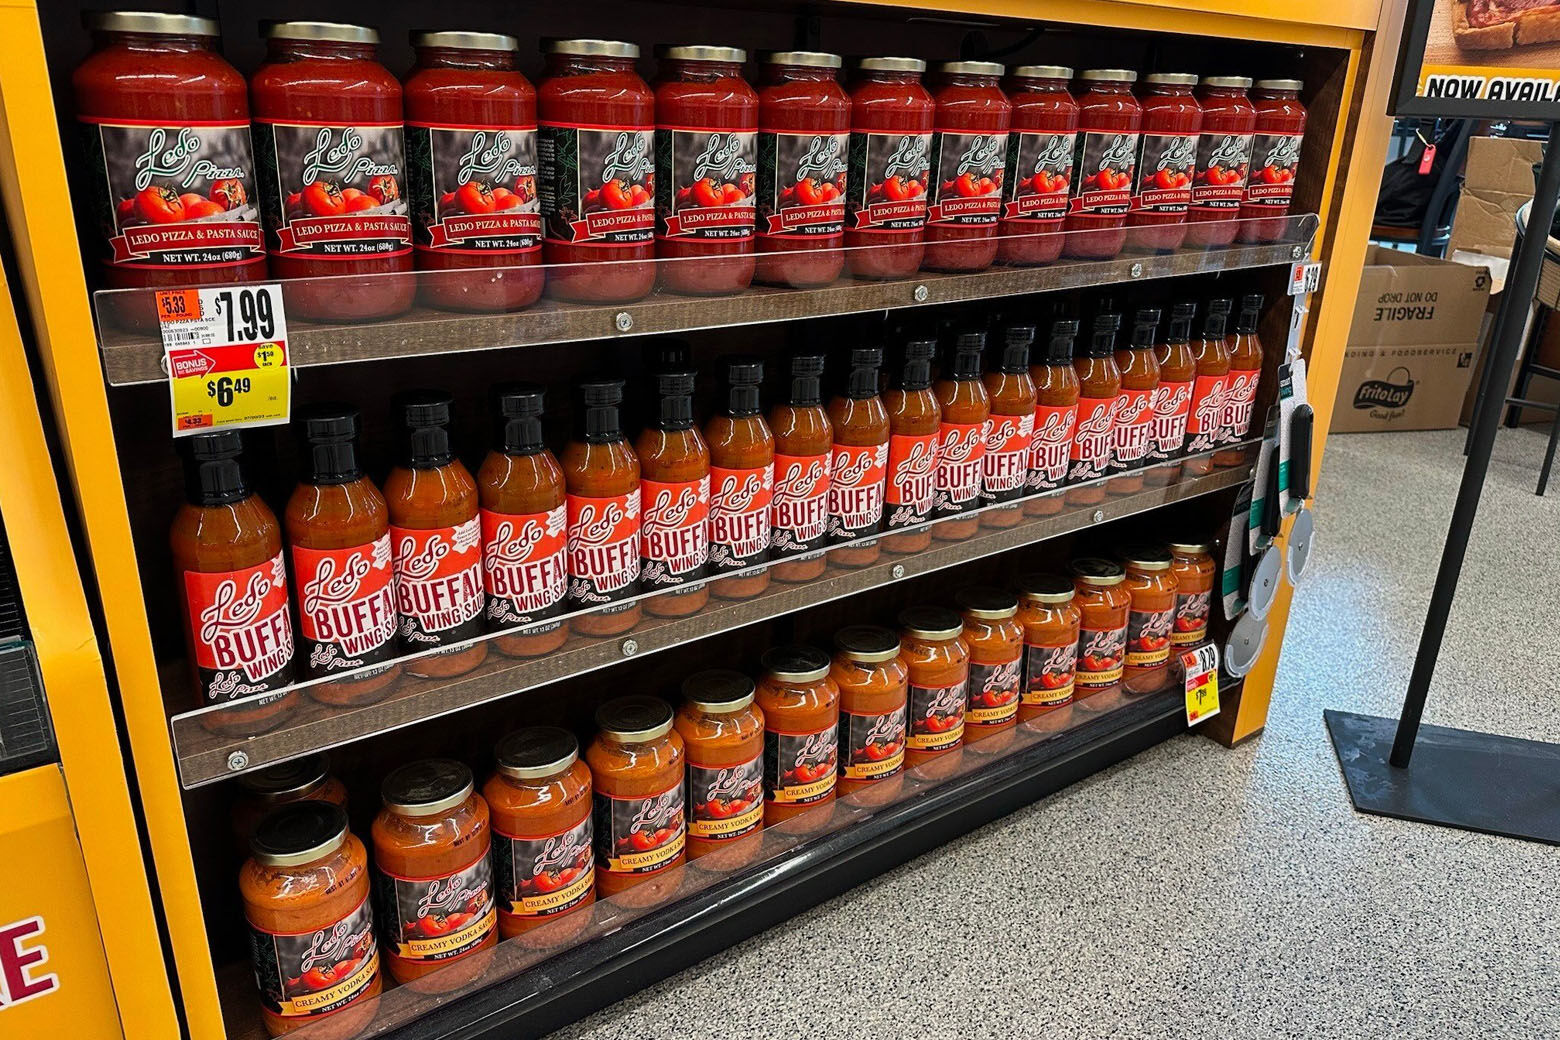 Giant Food stores have carried jarred versions of Ledo's pizza and pasta sauce, creamy vodka sauce and buffalo wing sauce for several years. (Courtesy Ledo Pizza)